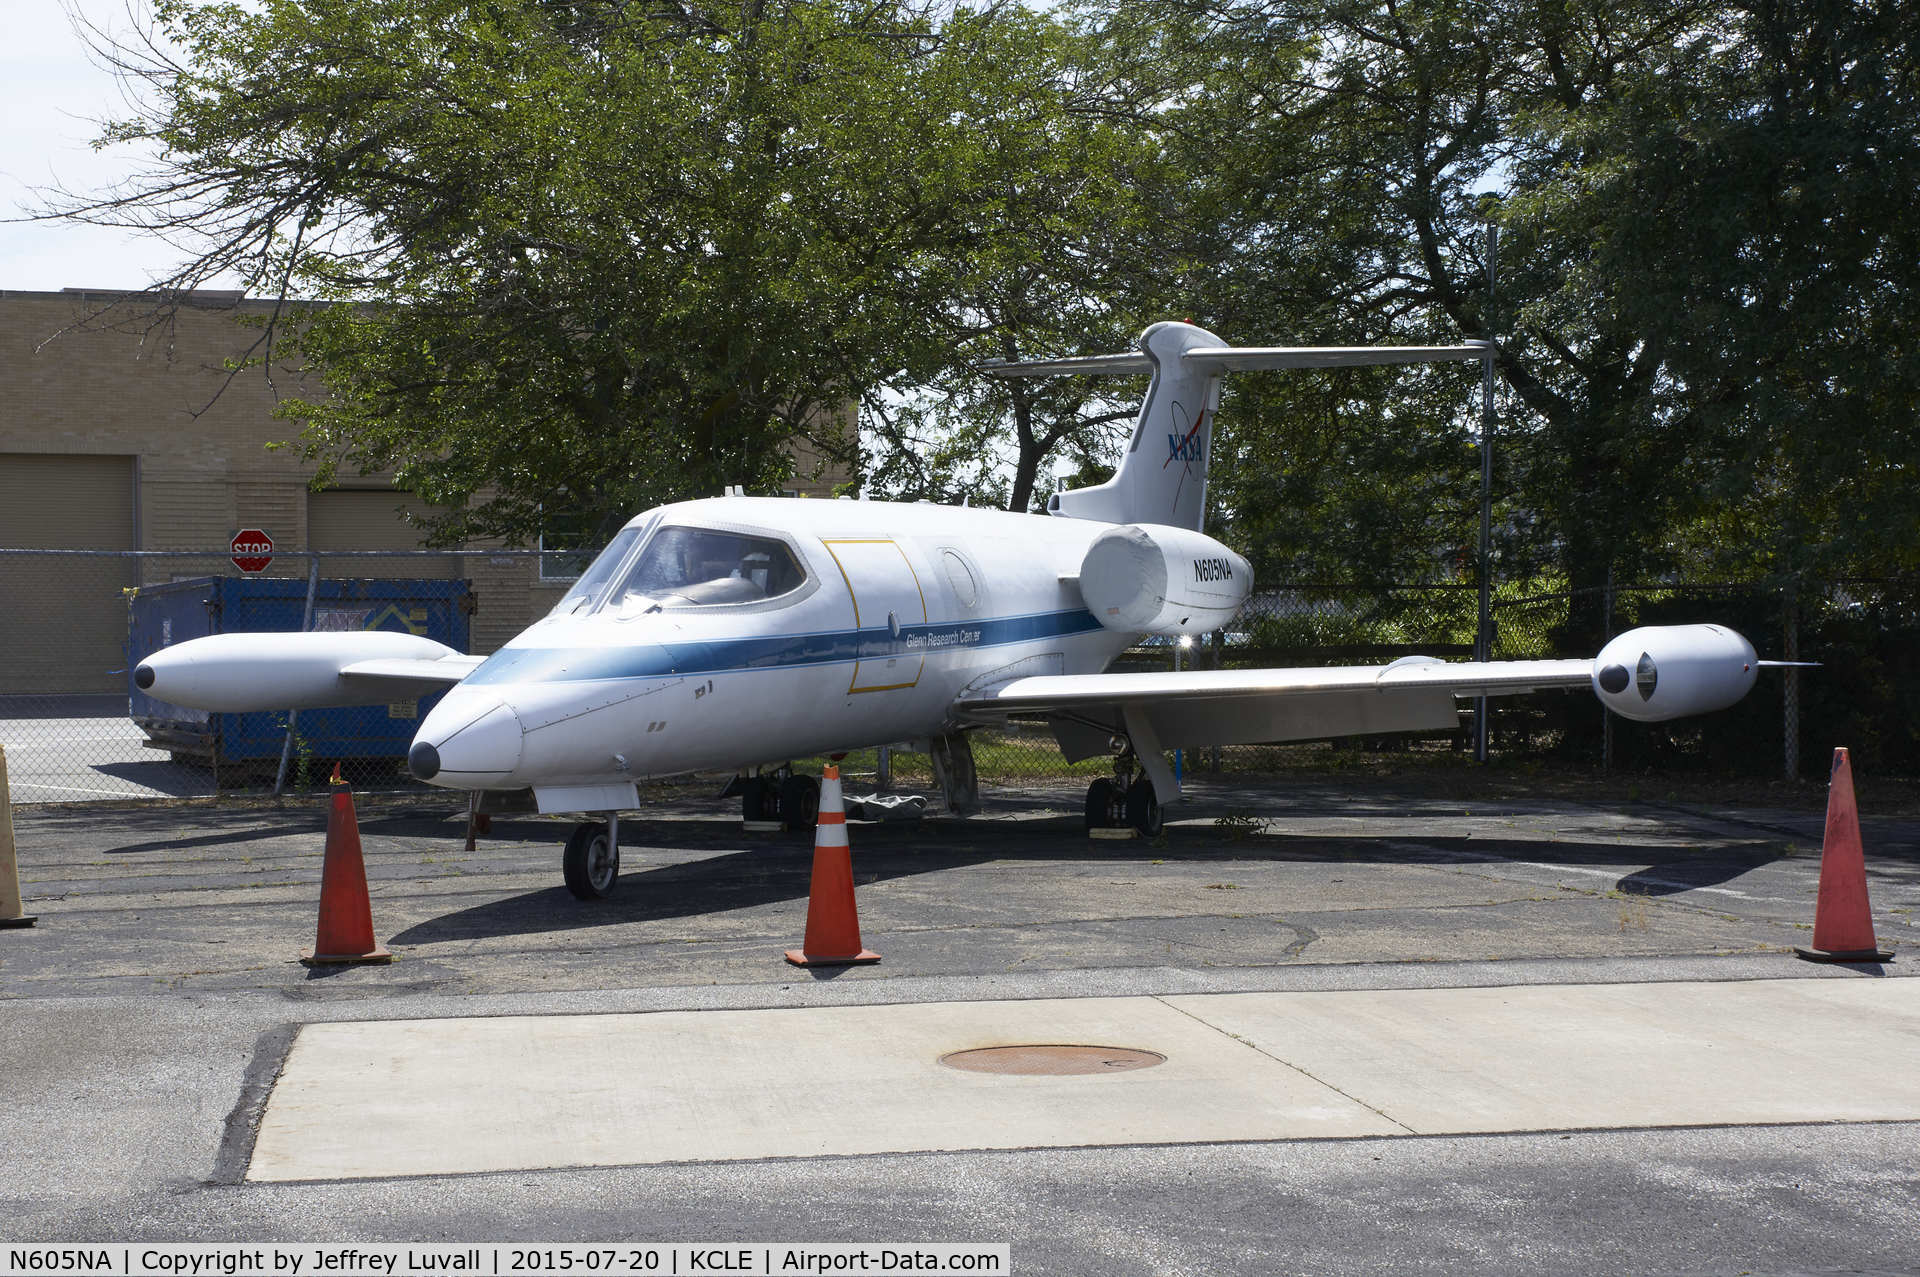 N605NA, 1965 Learjet Inc 23 C/N 23-049, NASA's Stennis Space Center used this Learjet from the 1980's until ~ 2000 as a platform for various remote sensing instruments (TIMS,CAMS, ATLAS). It was based at KHSA Stennis International Airport
Bay St Louis, Ms. Then NASA Glenn until 2004 & retired.